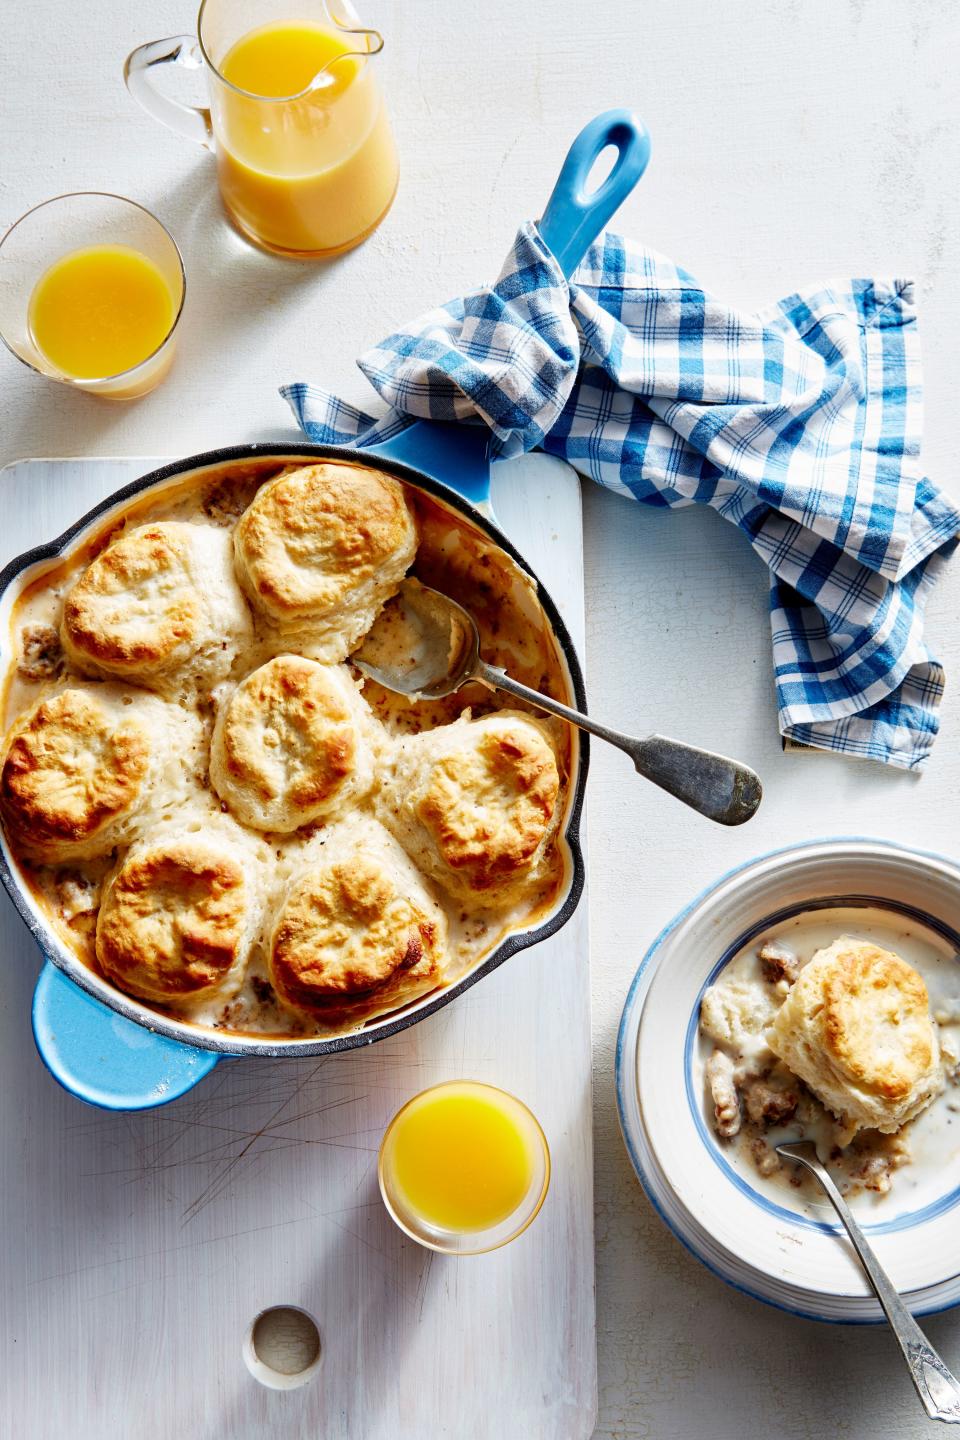 Biscuits-and-Gravy Skillet